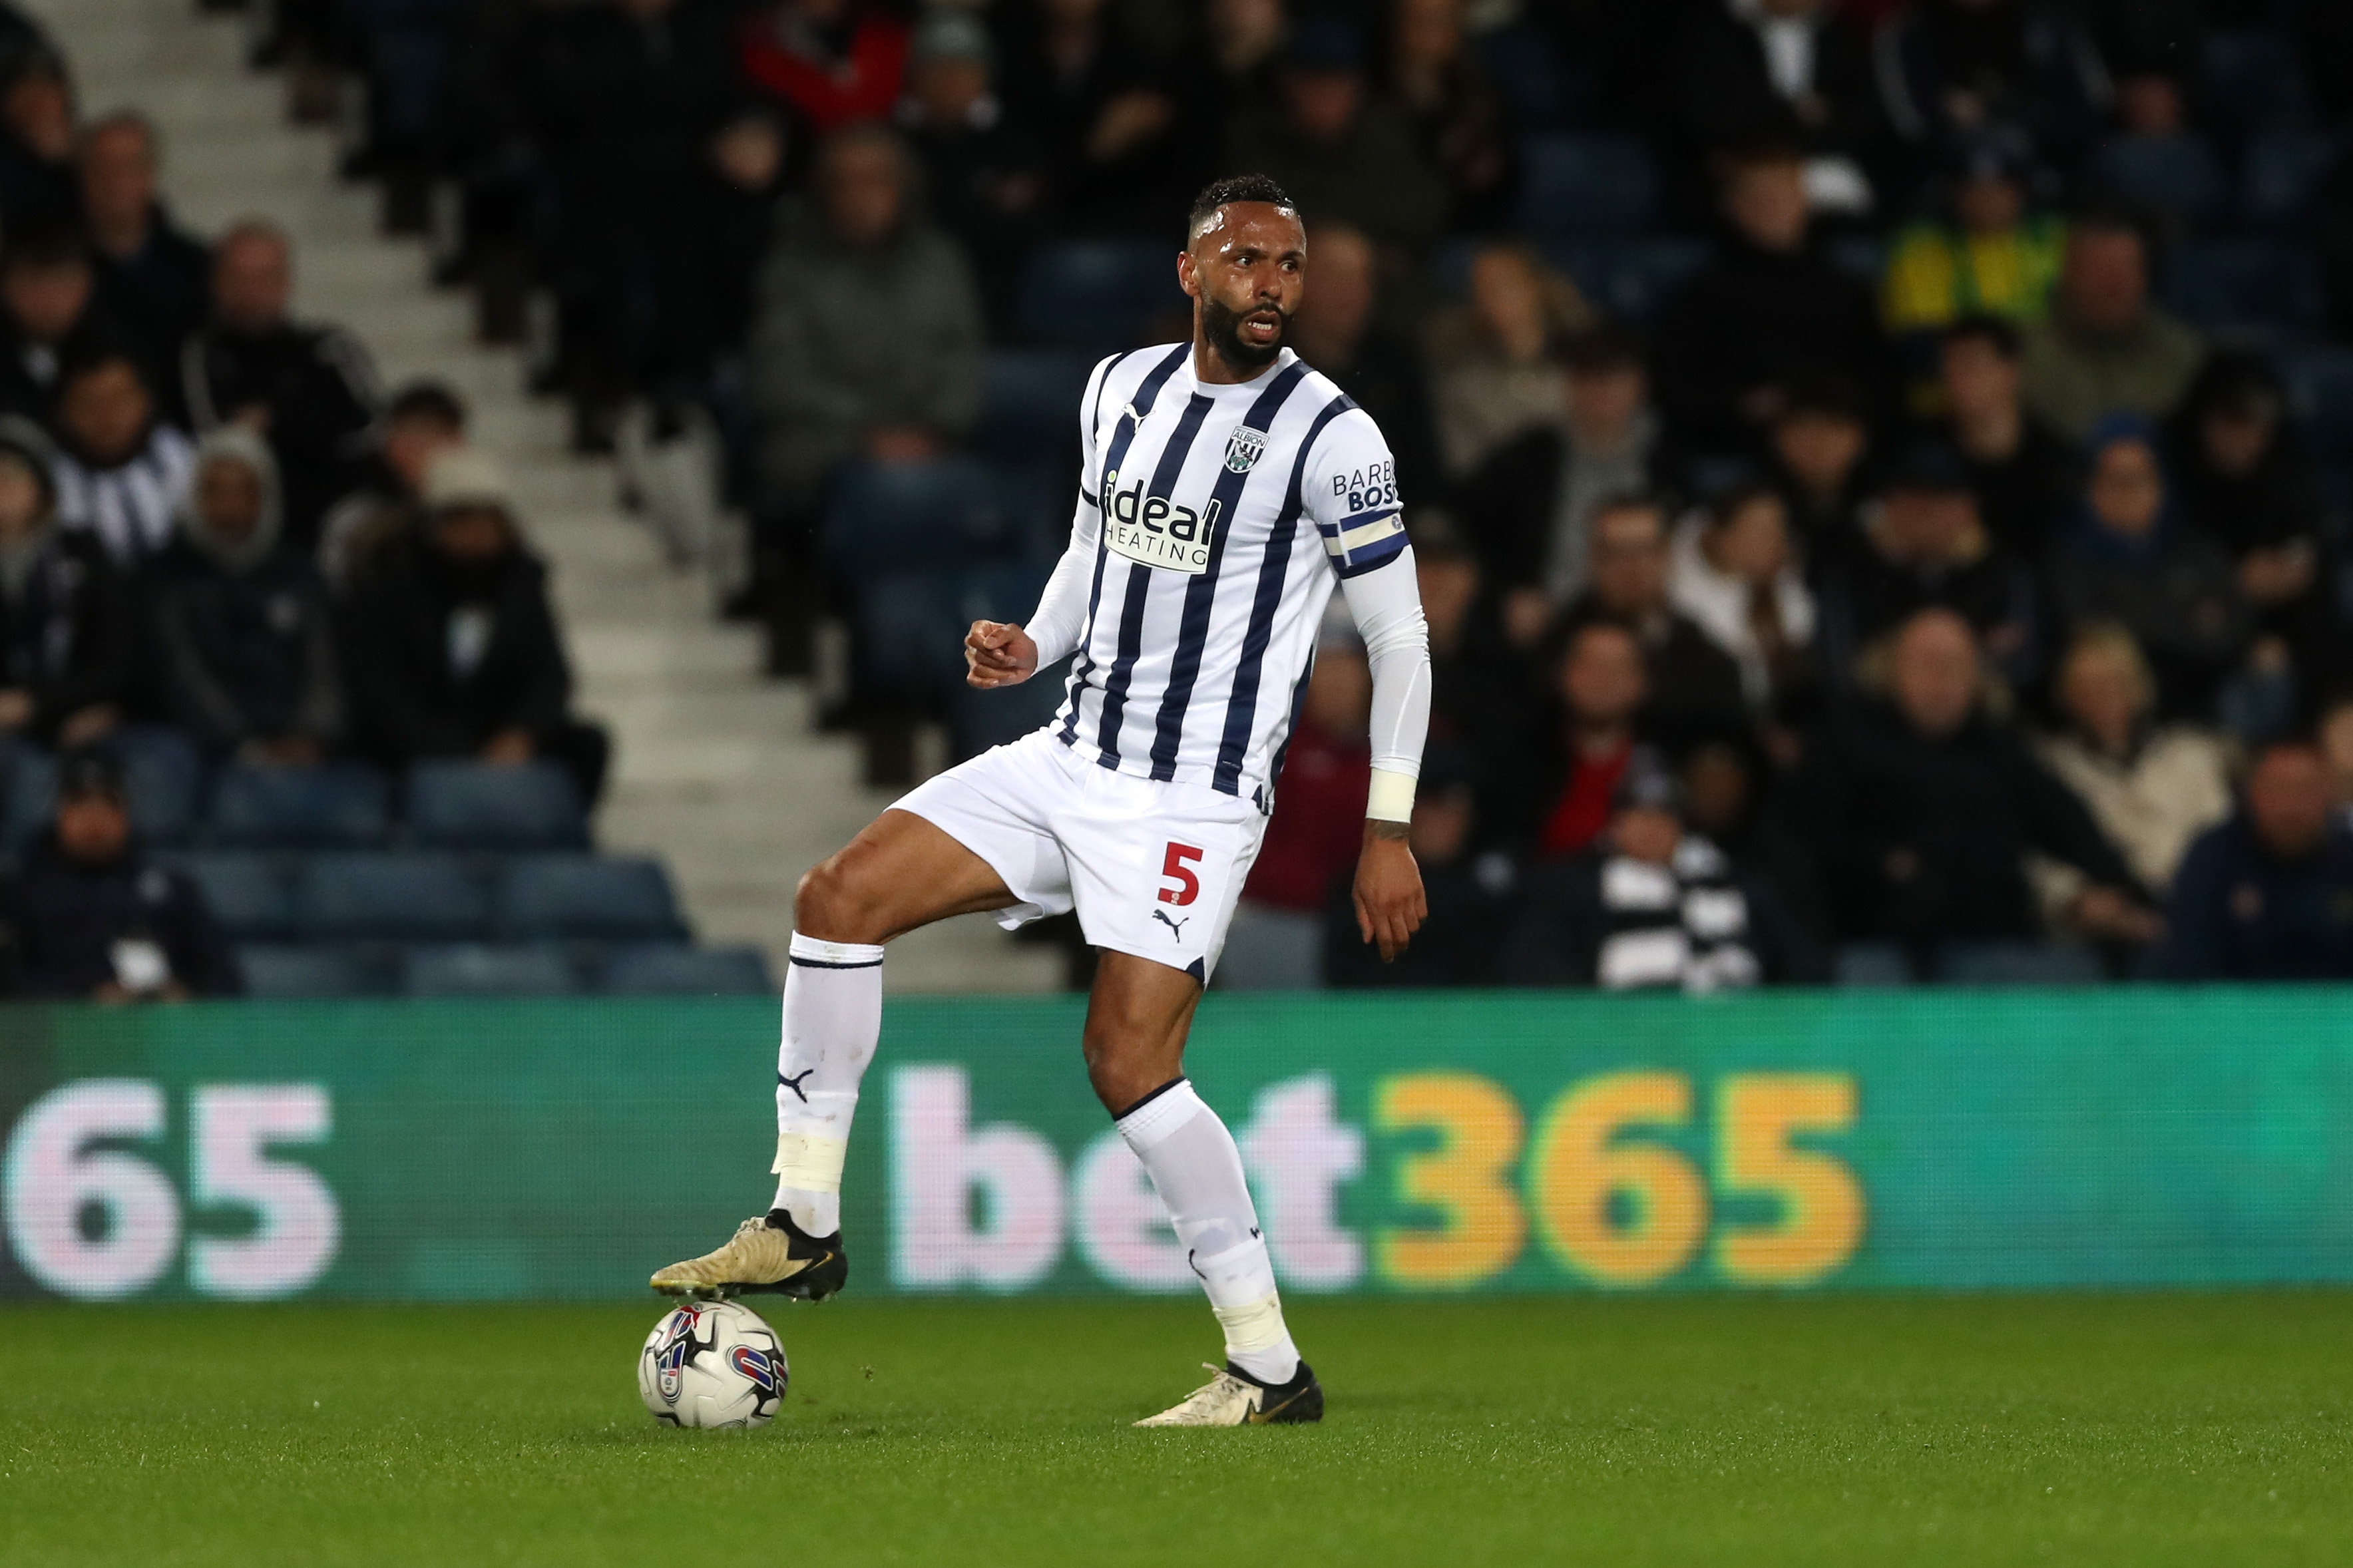 Kyle Bartley on the ball against Rotherham United